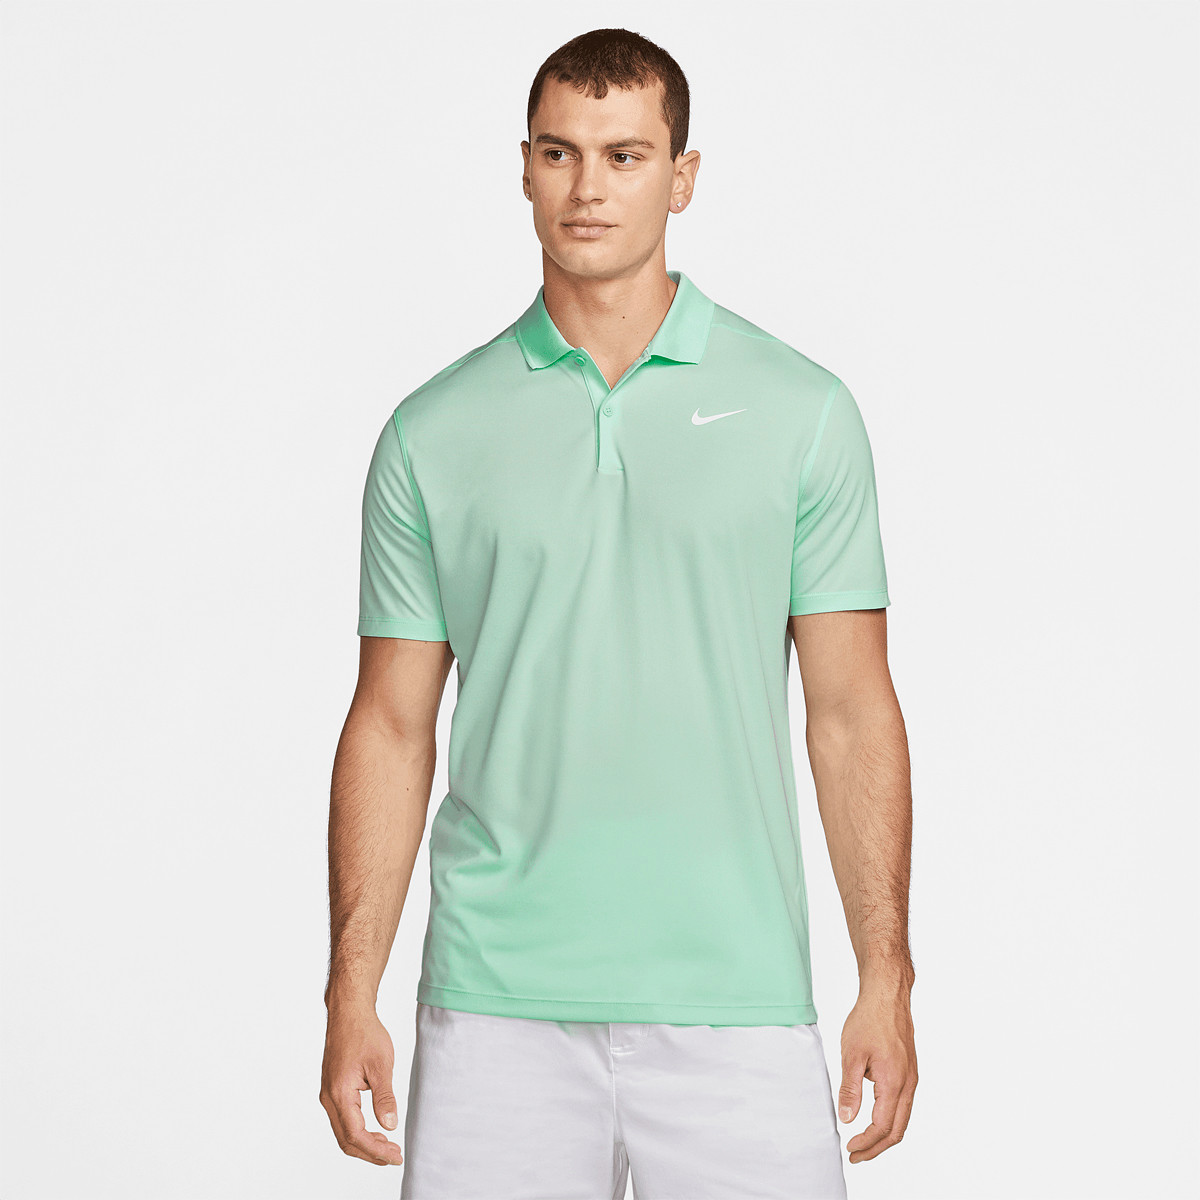 POLO NIKE COURT DRI-FIT PIQUE VICTORY